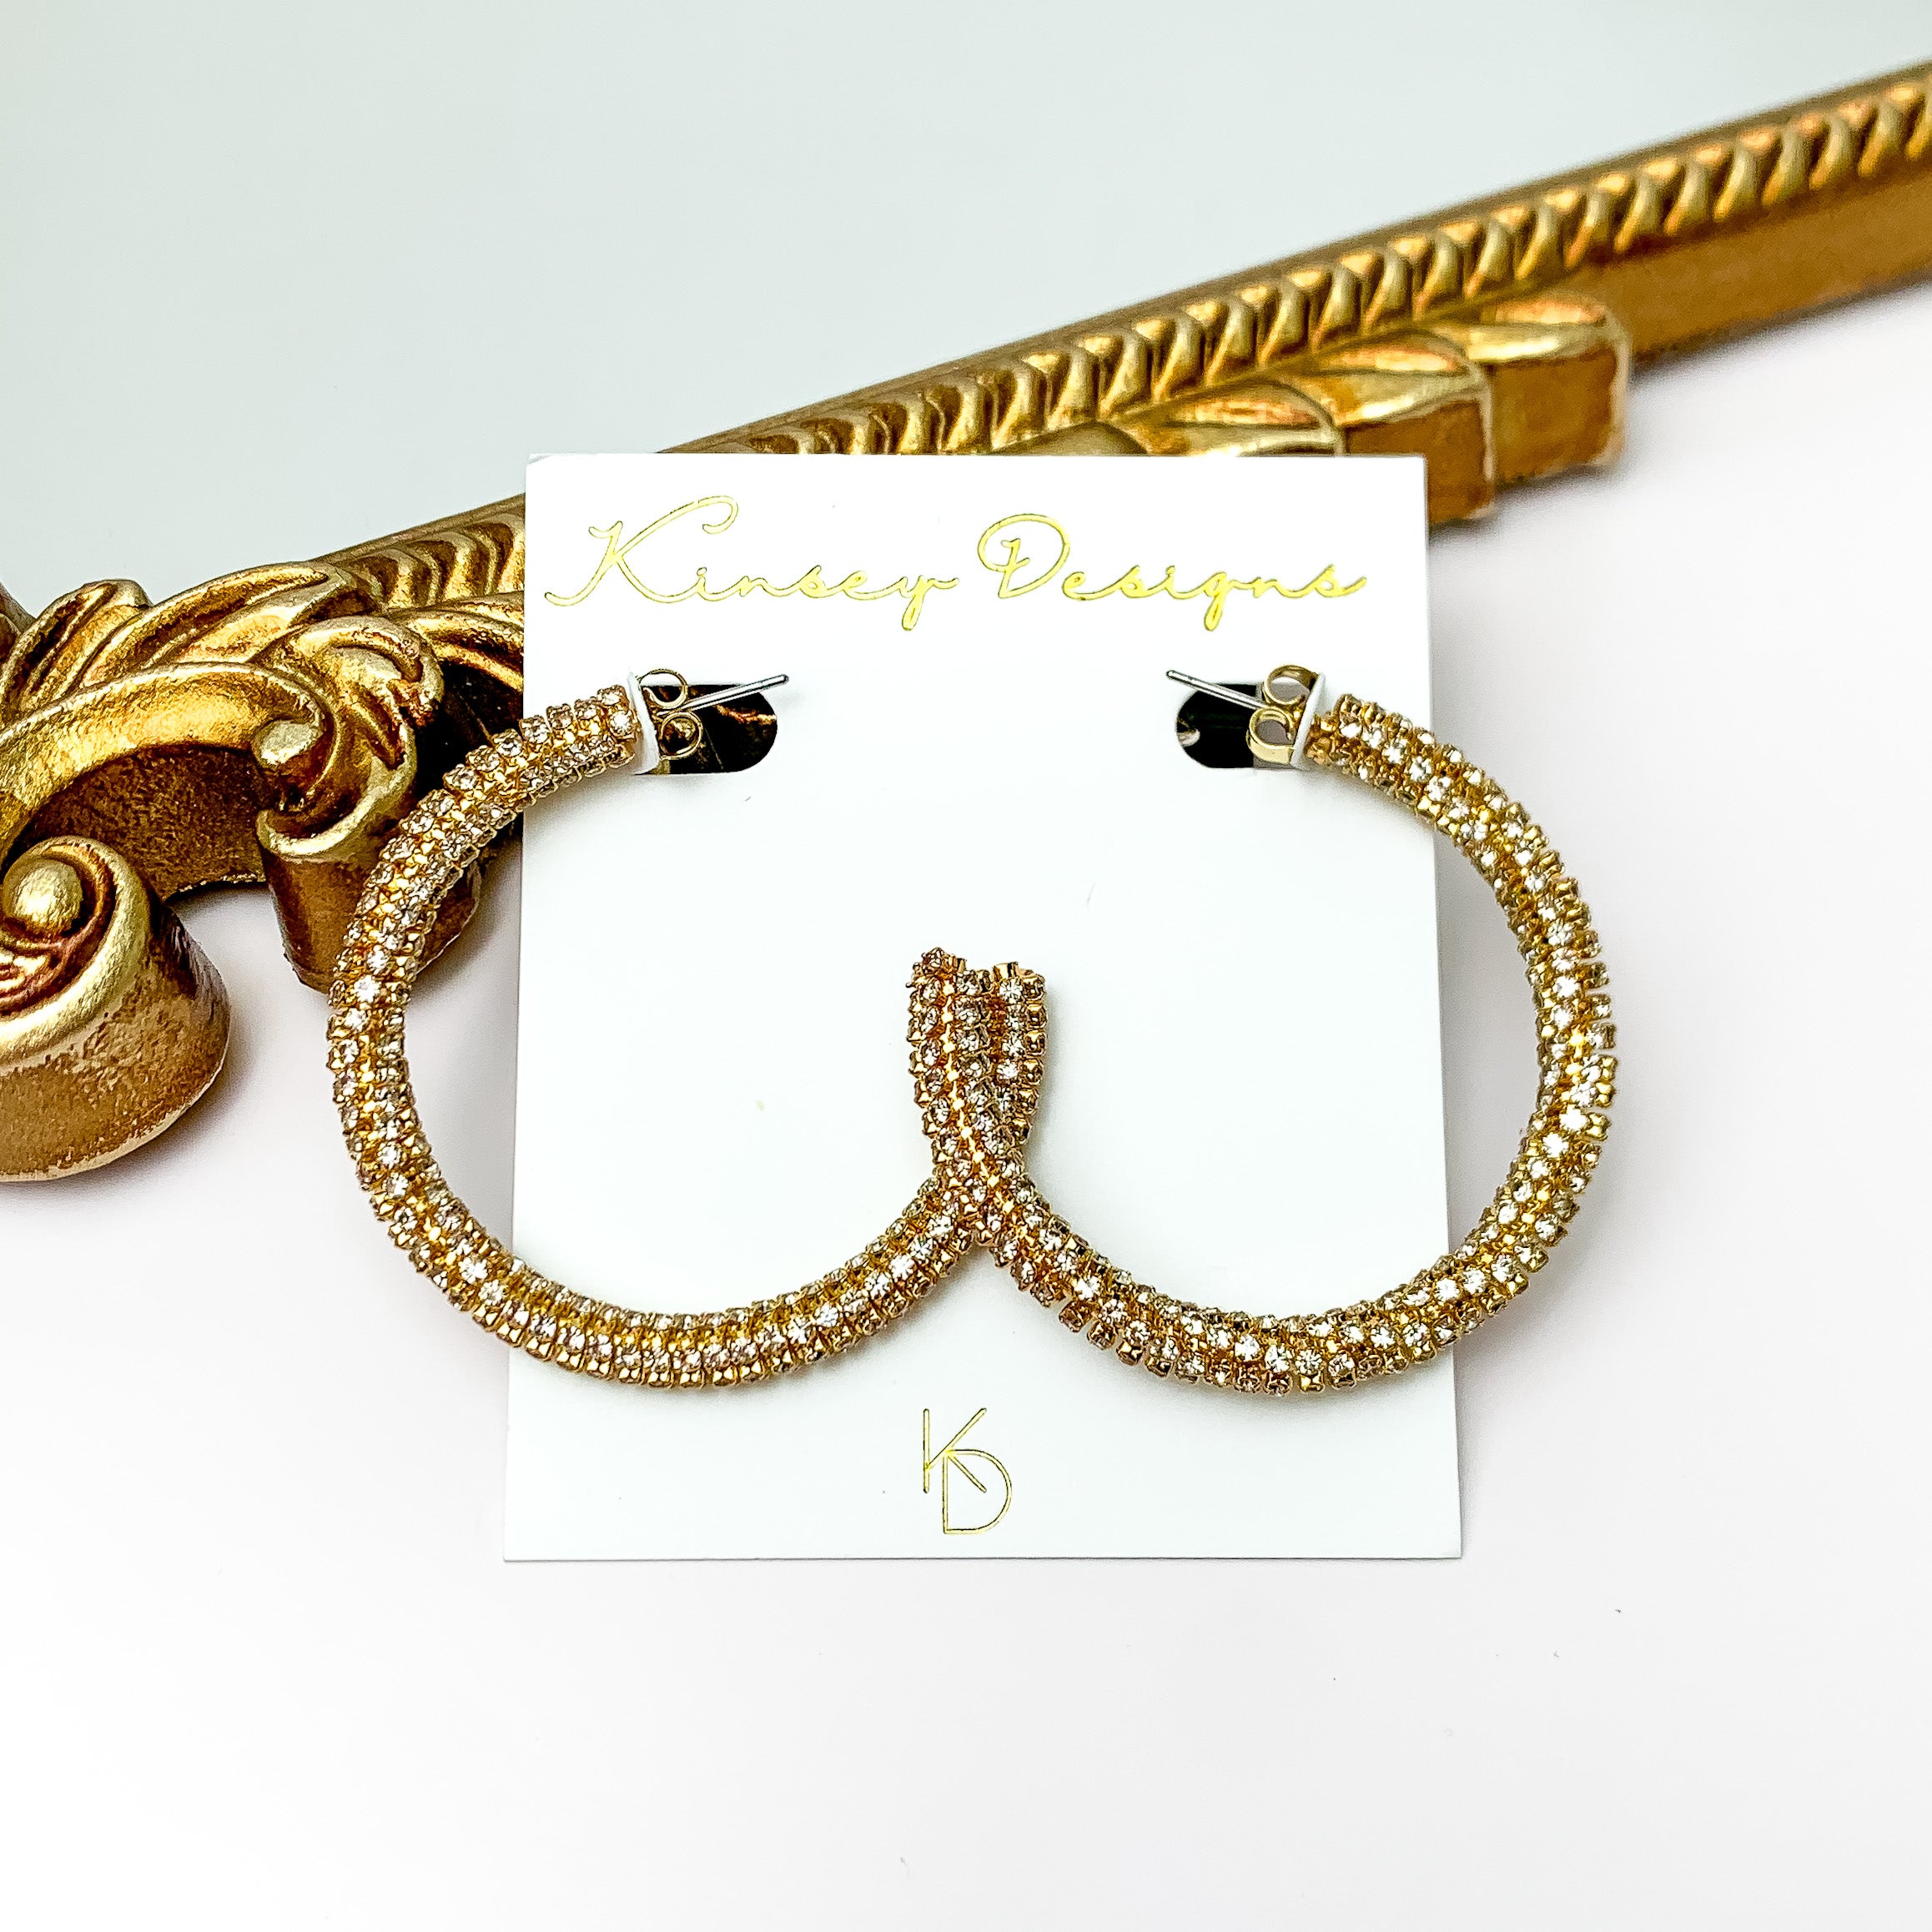 A pair of gold hoop earrings encrusted with clear crystals. These earrings are pictured in front of a gold mirror on a white background.  